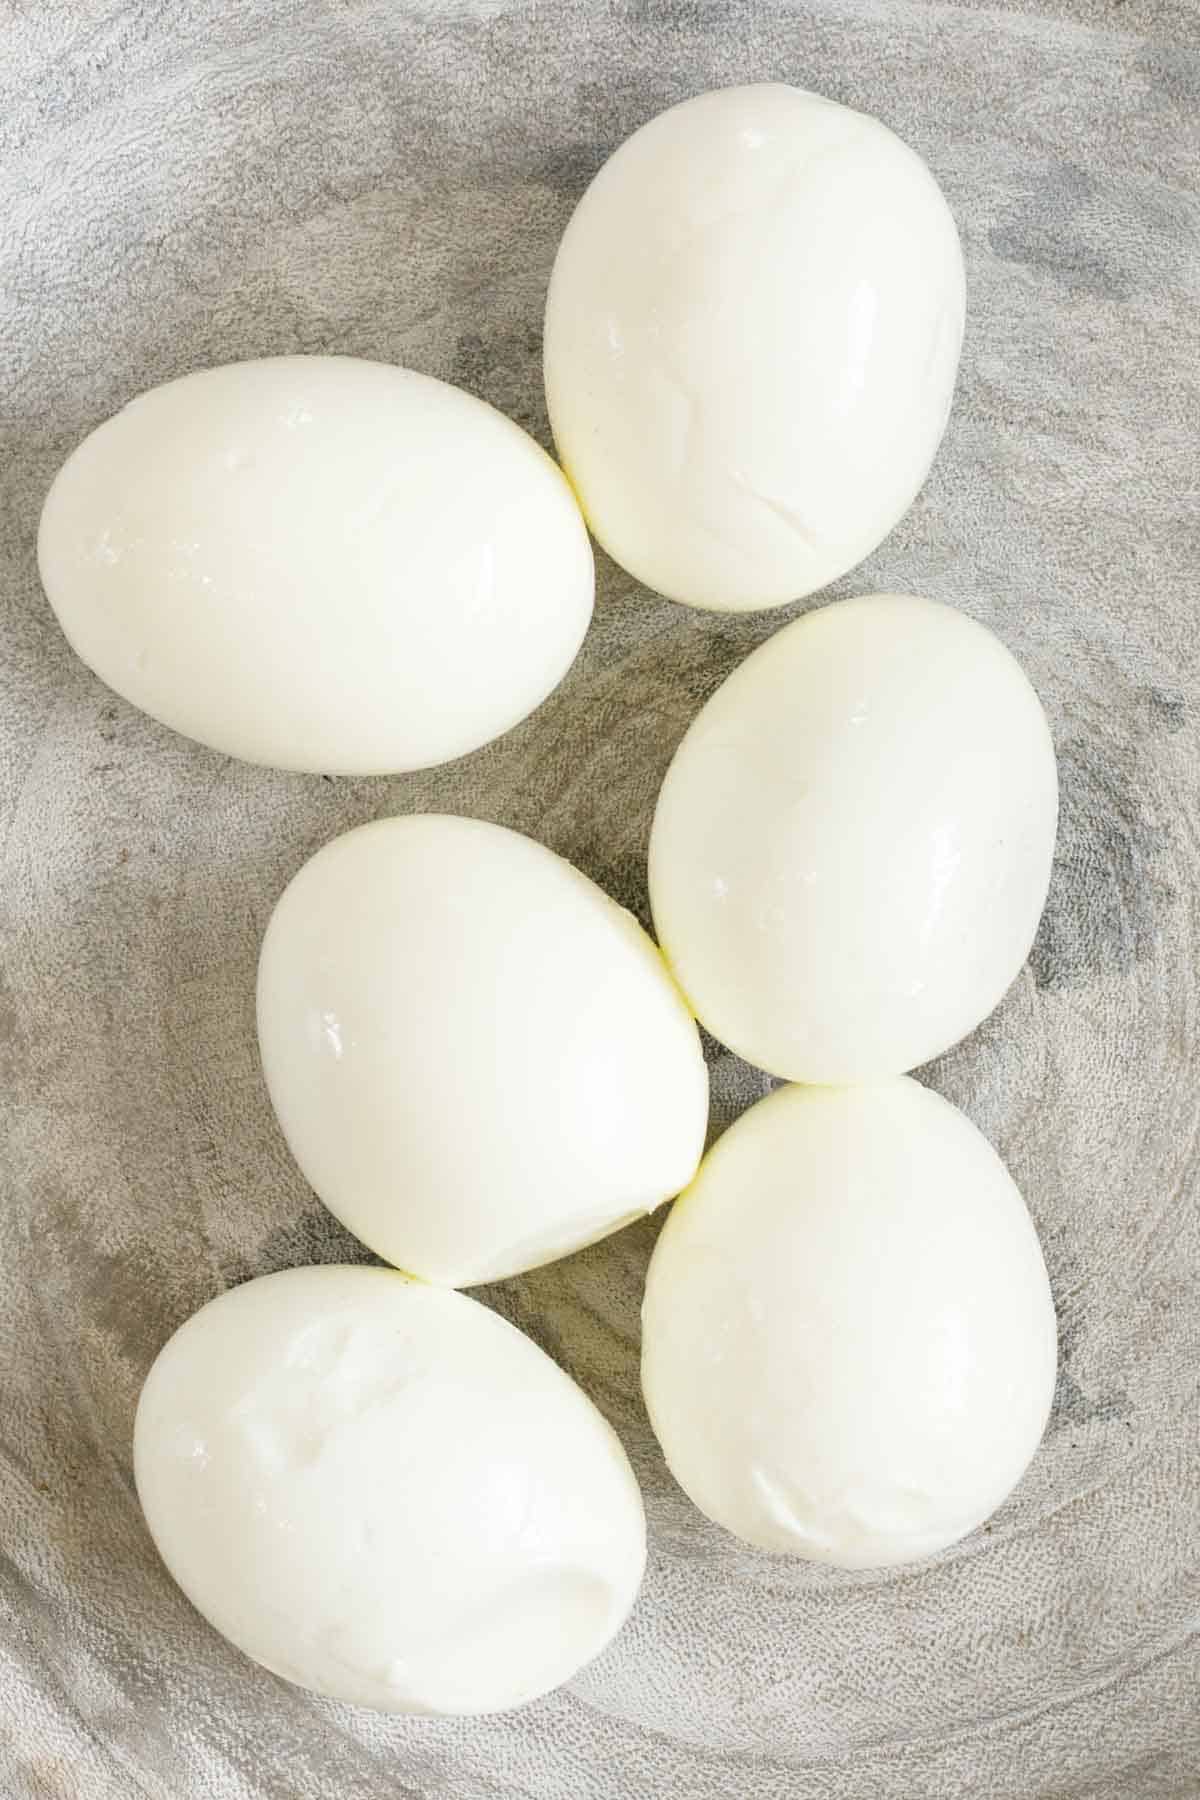 Close up of finished boiled eggs.